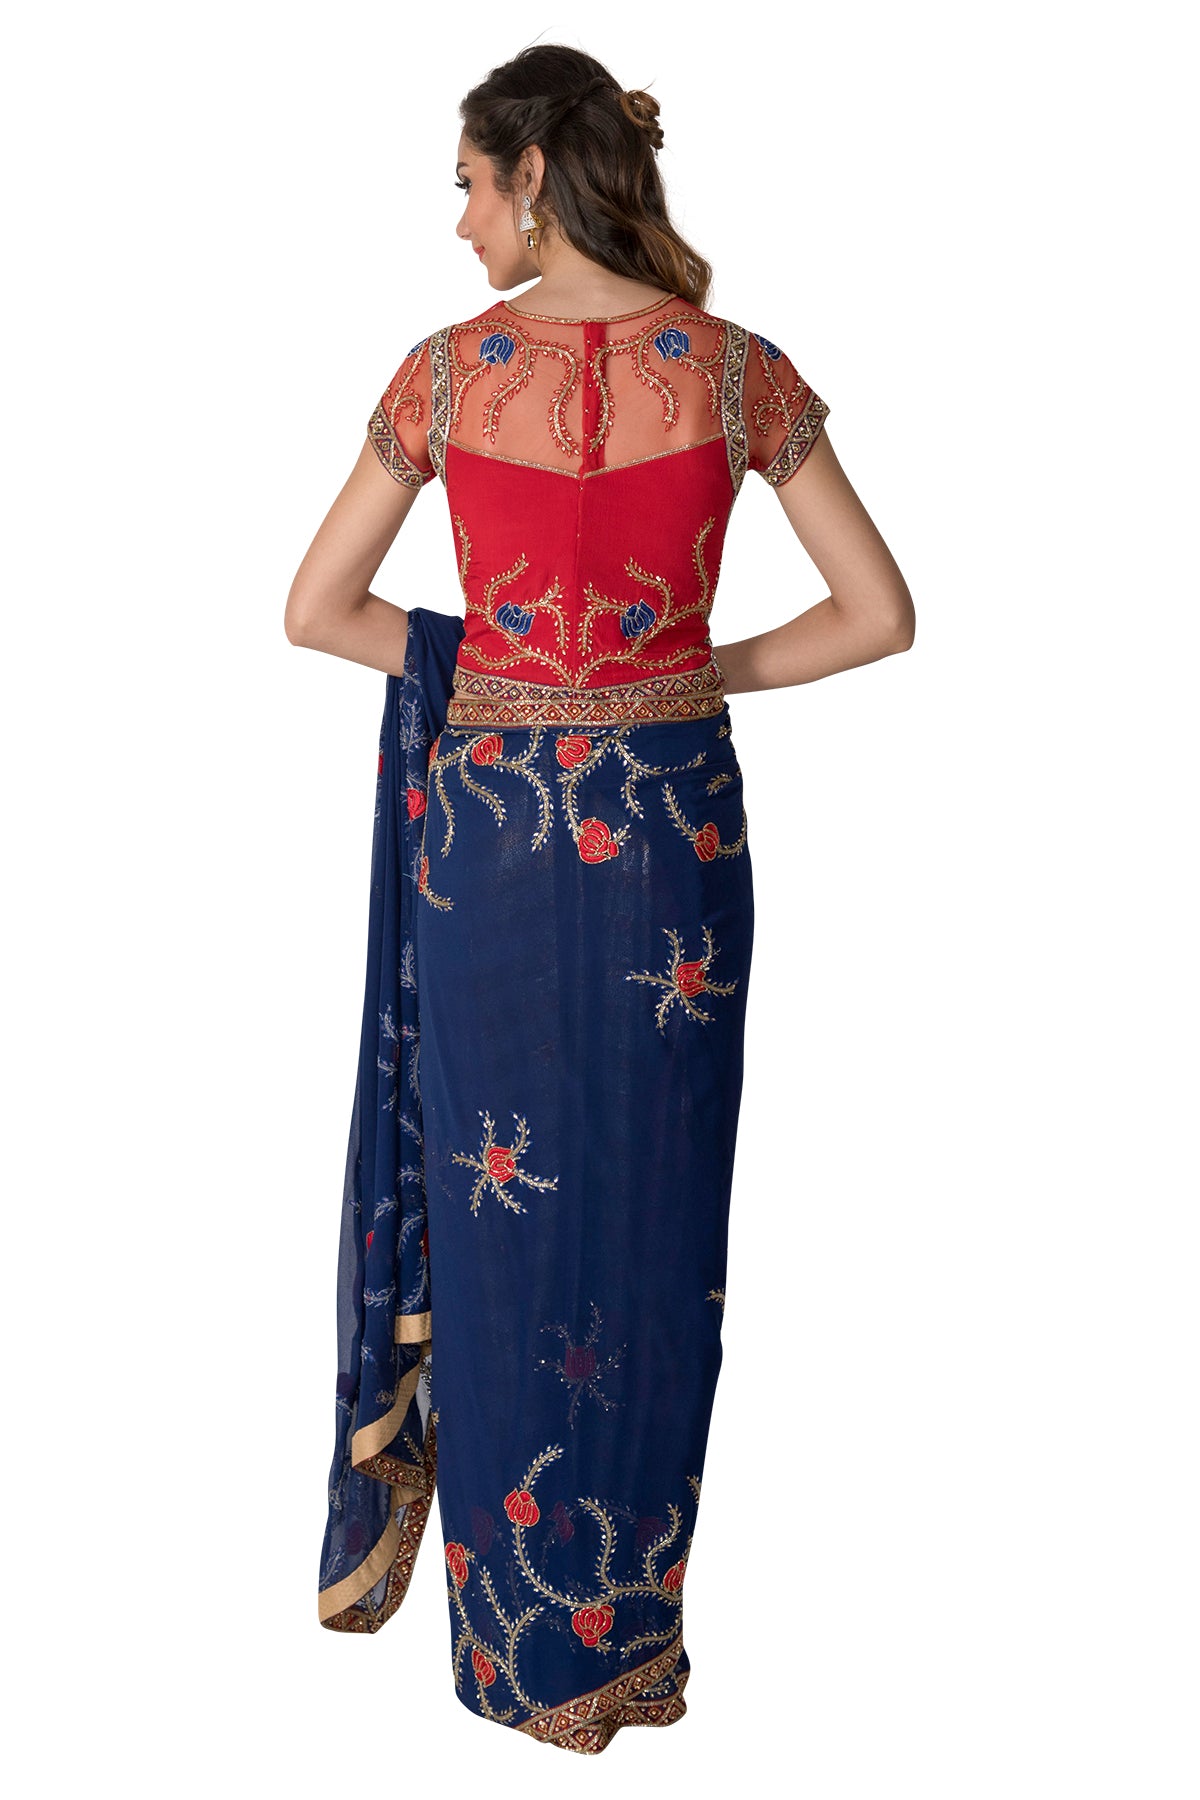 Royal Blue Saree With Red Flowers